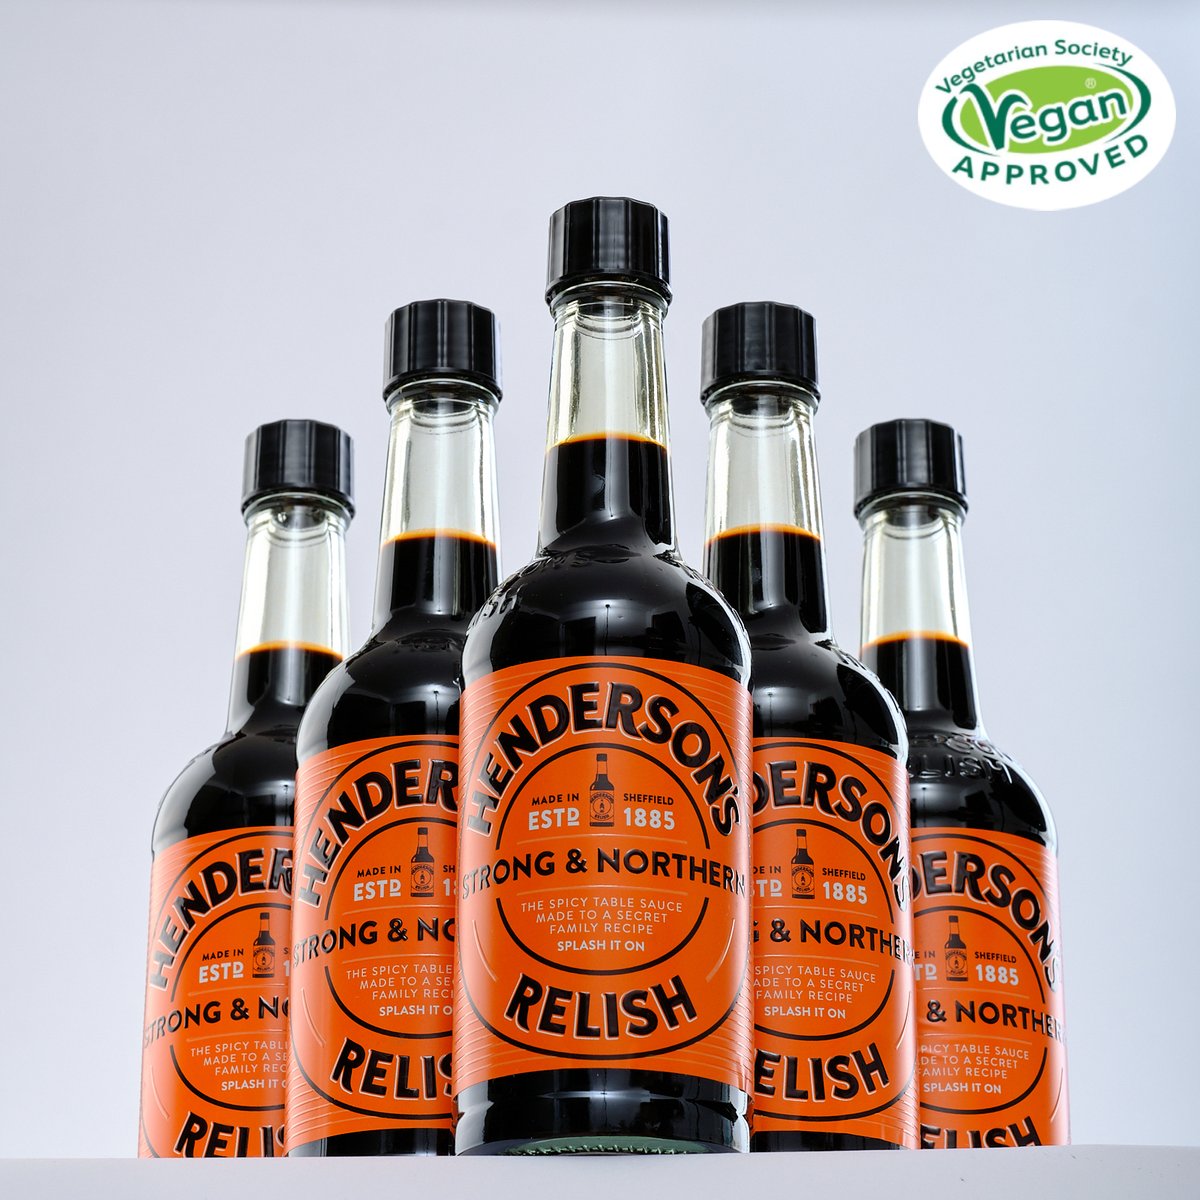 Add a kick to your dish with a splash of Henderson's Relish – the taste of tradition from Sheffield to your plate! @HendoRelish🌶️🍽️ #Vegan approved by @vegsoc✅ #VegetarianSocietyApproved #HendersonRelish